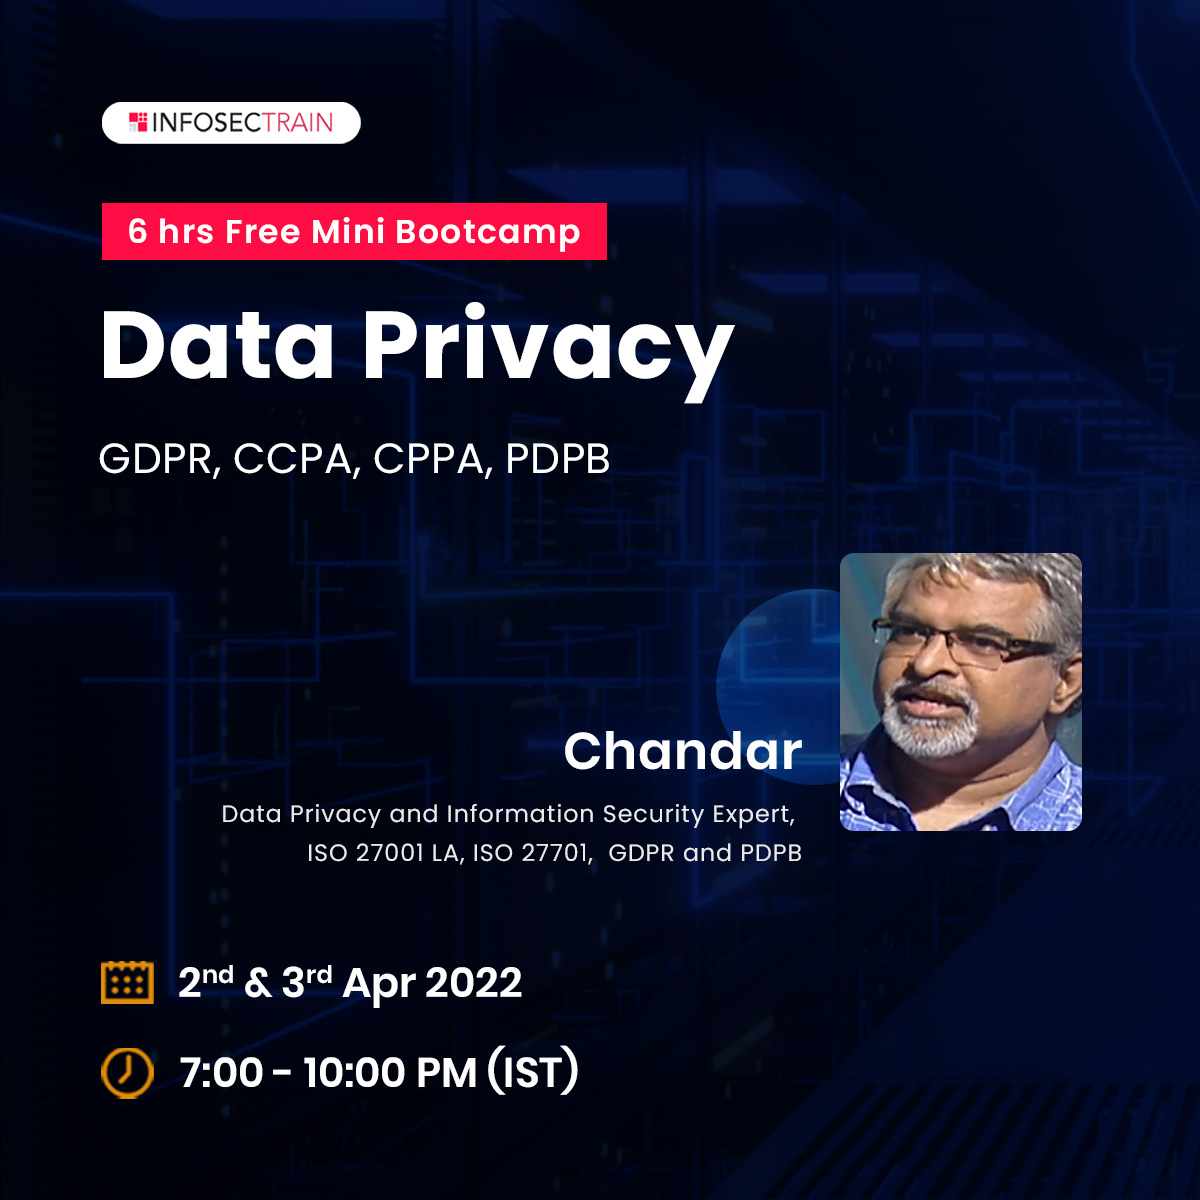 Free Webinar on Data Privacy Bootcamp (GDPR, CCPA, CPPA, PDPB), Online Event